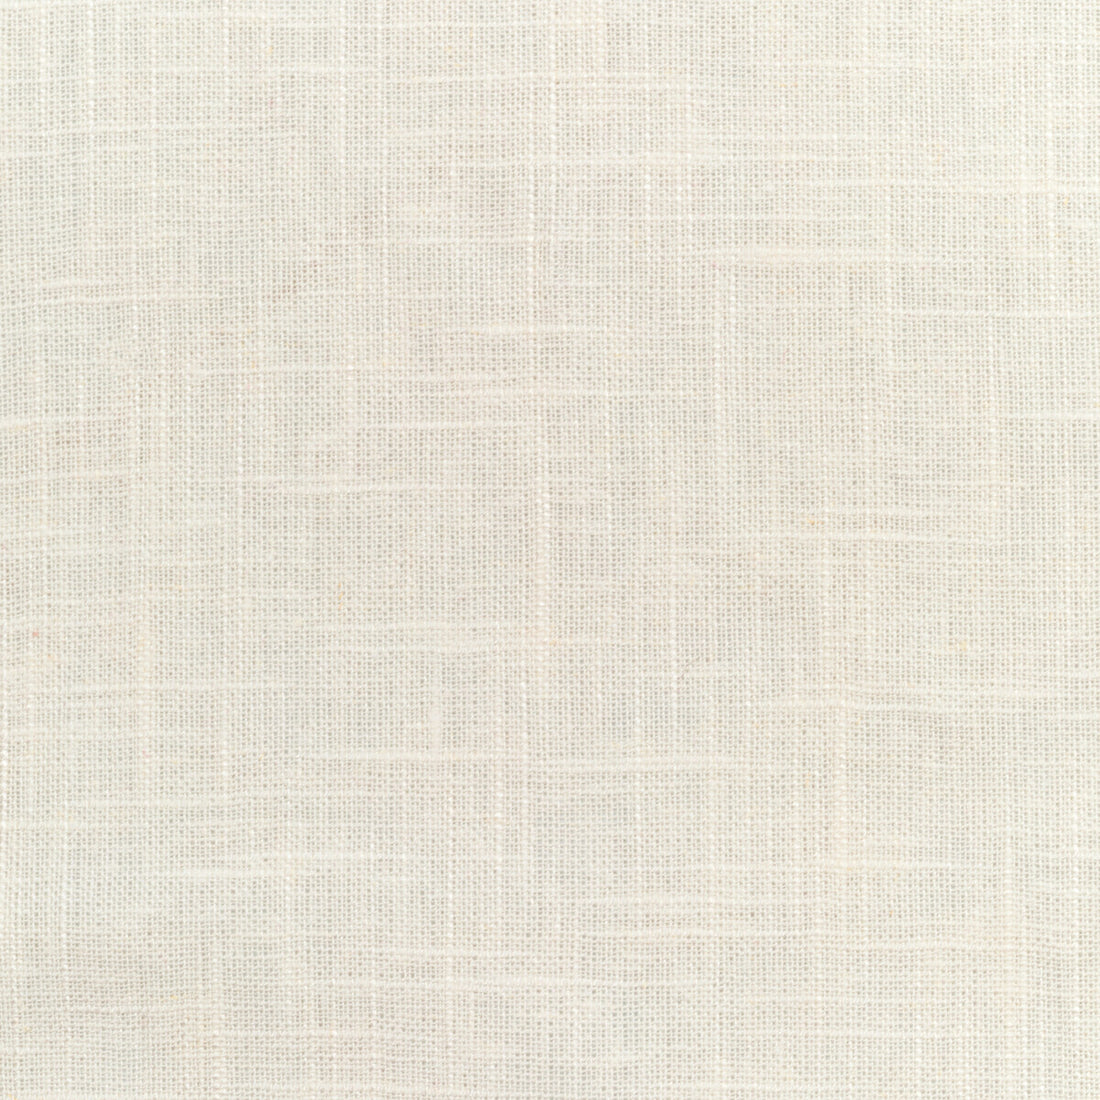 Barnegat fabric in ice color - pattern 24573.101.0 - by Kravet Basics in the Perfect Plains collection